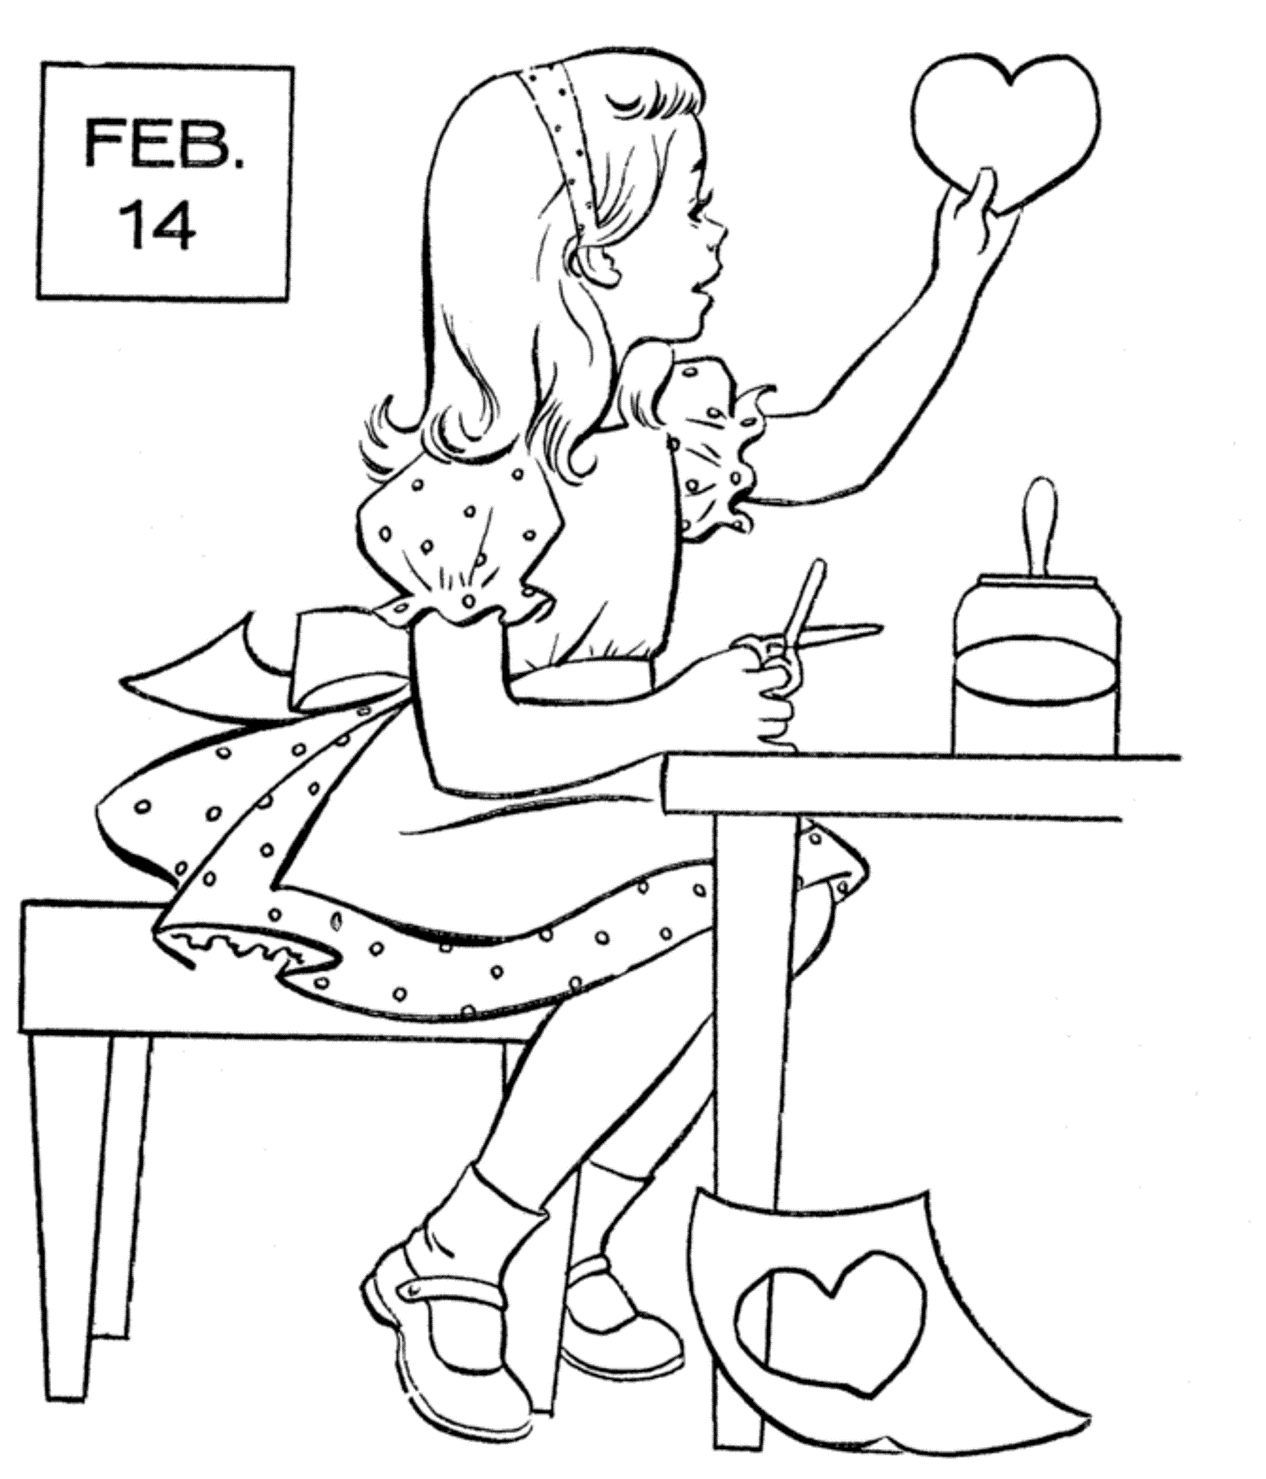 14 February Coloring Pages Free Printable